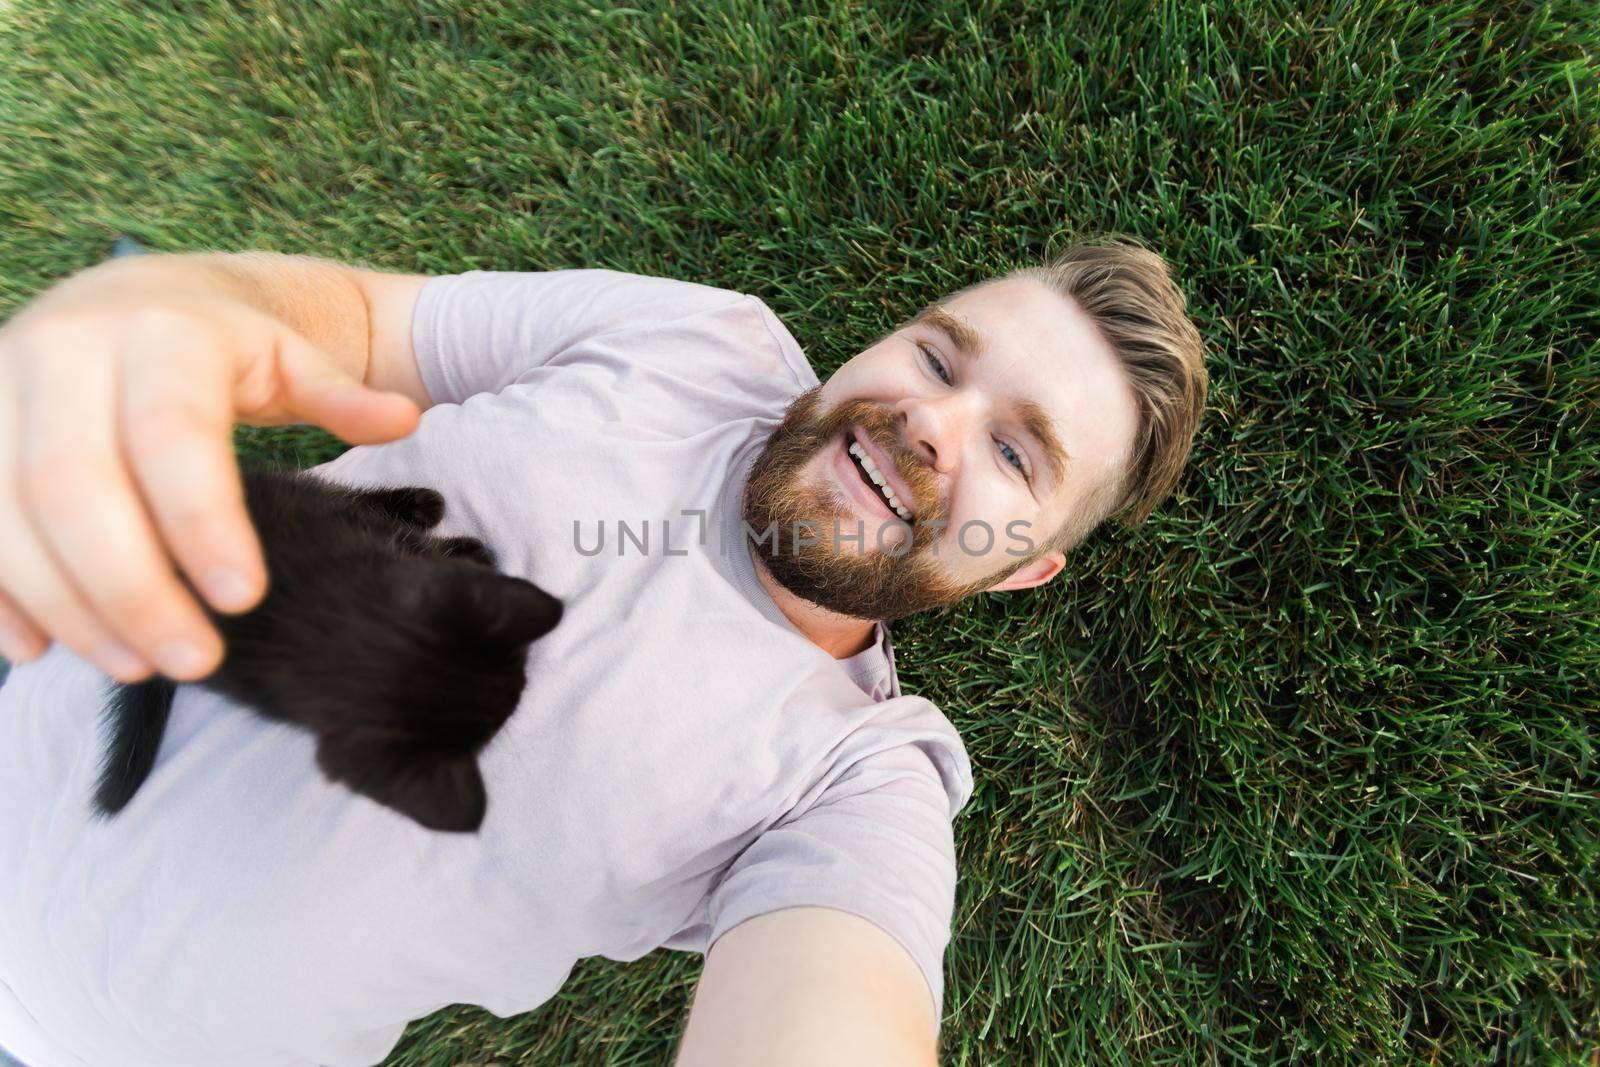 Man with little kitten lying and playing on grass - friendship love animals and pet owner concept by Satura86